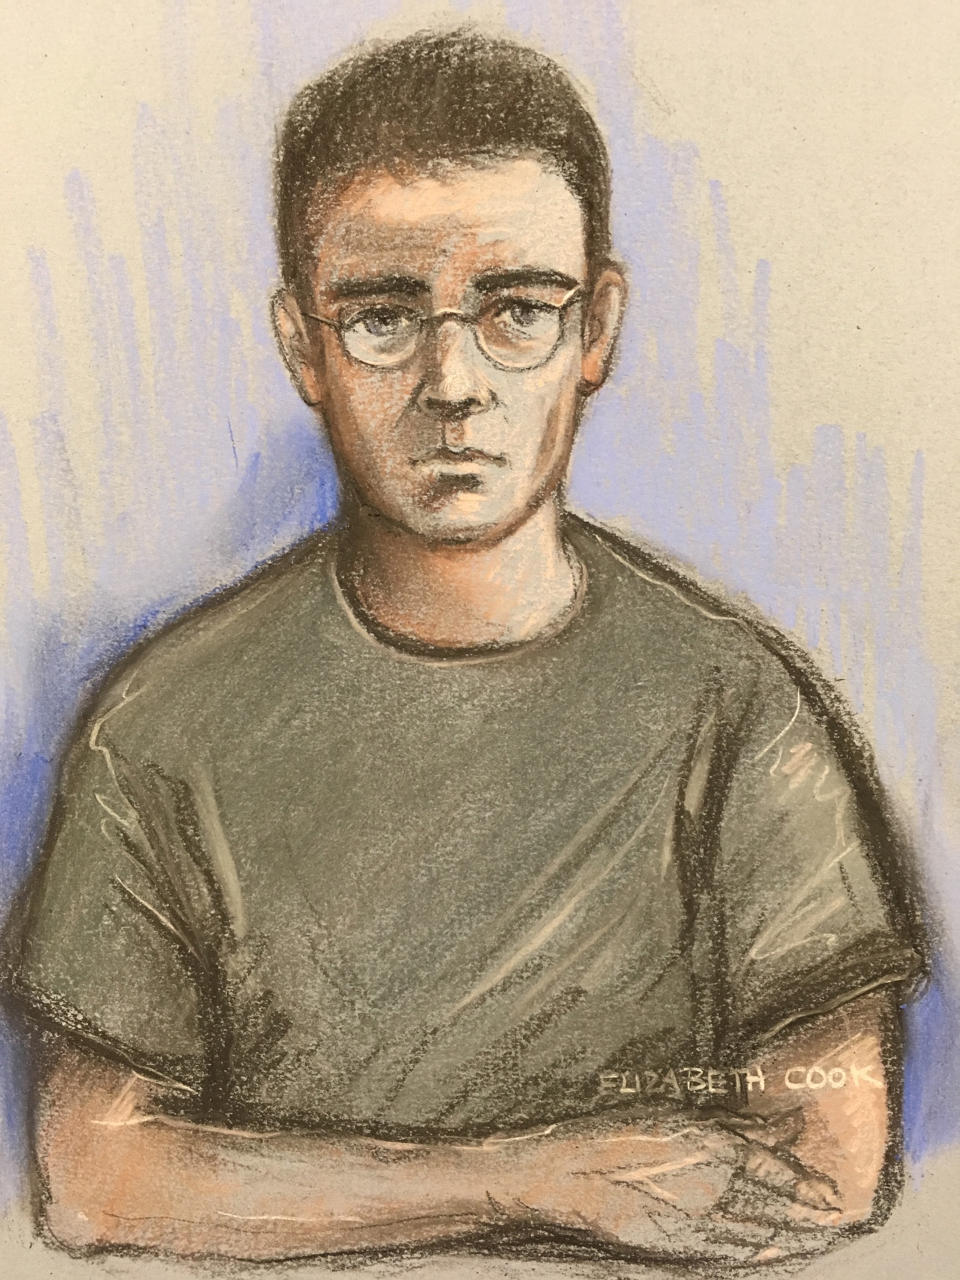 Pawel Relowicz at a previous court appearance. (PA/Elizabeth Cook)